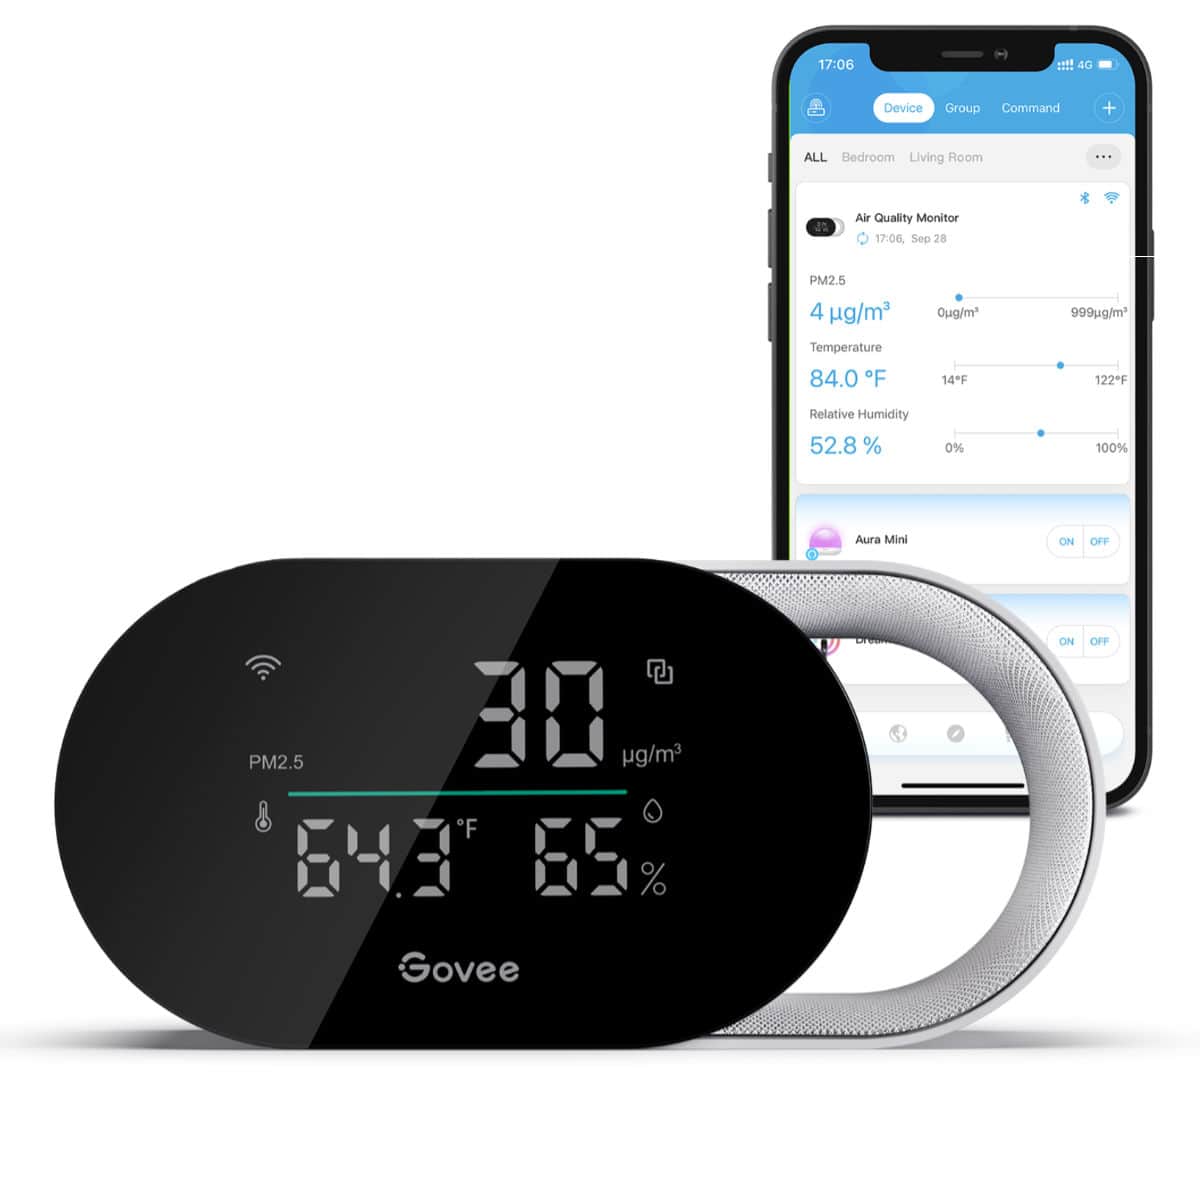 Govee announces new Smart Air Quality Monitor